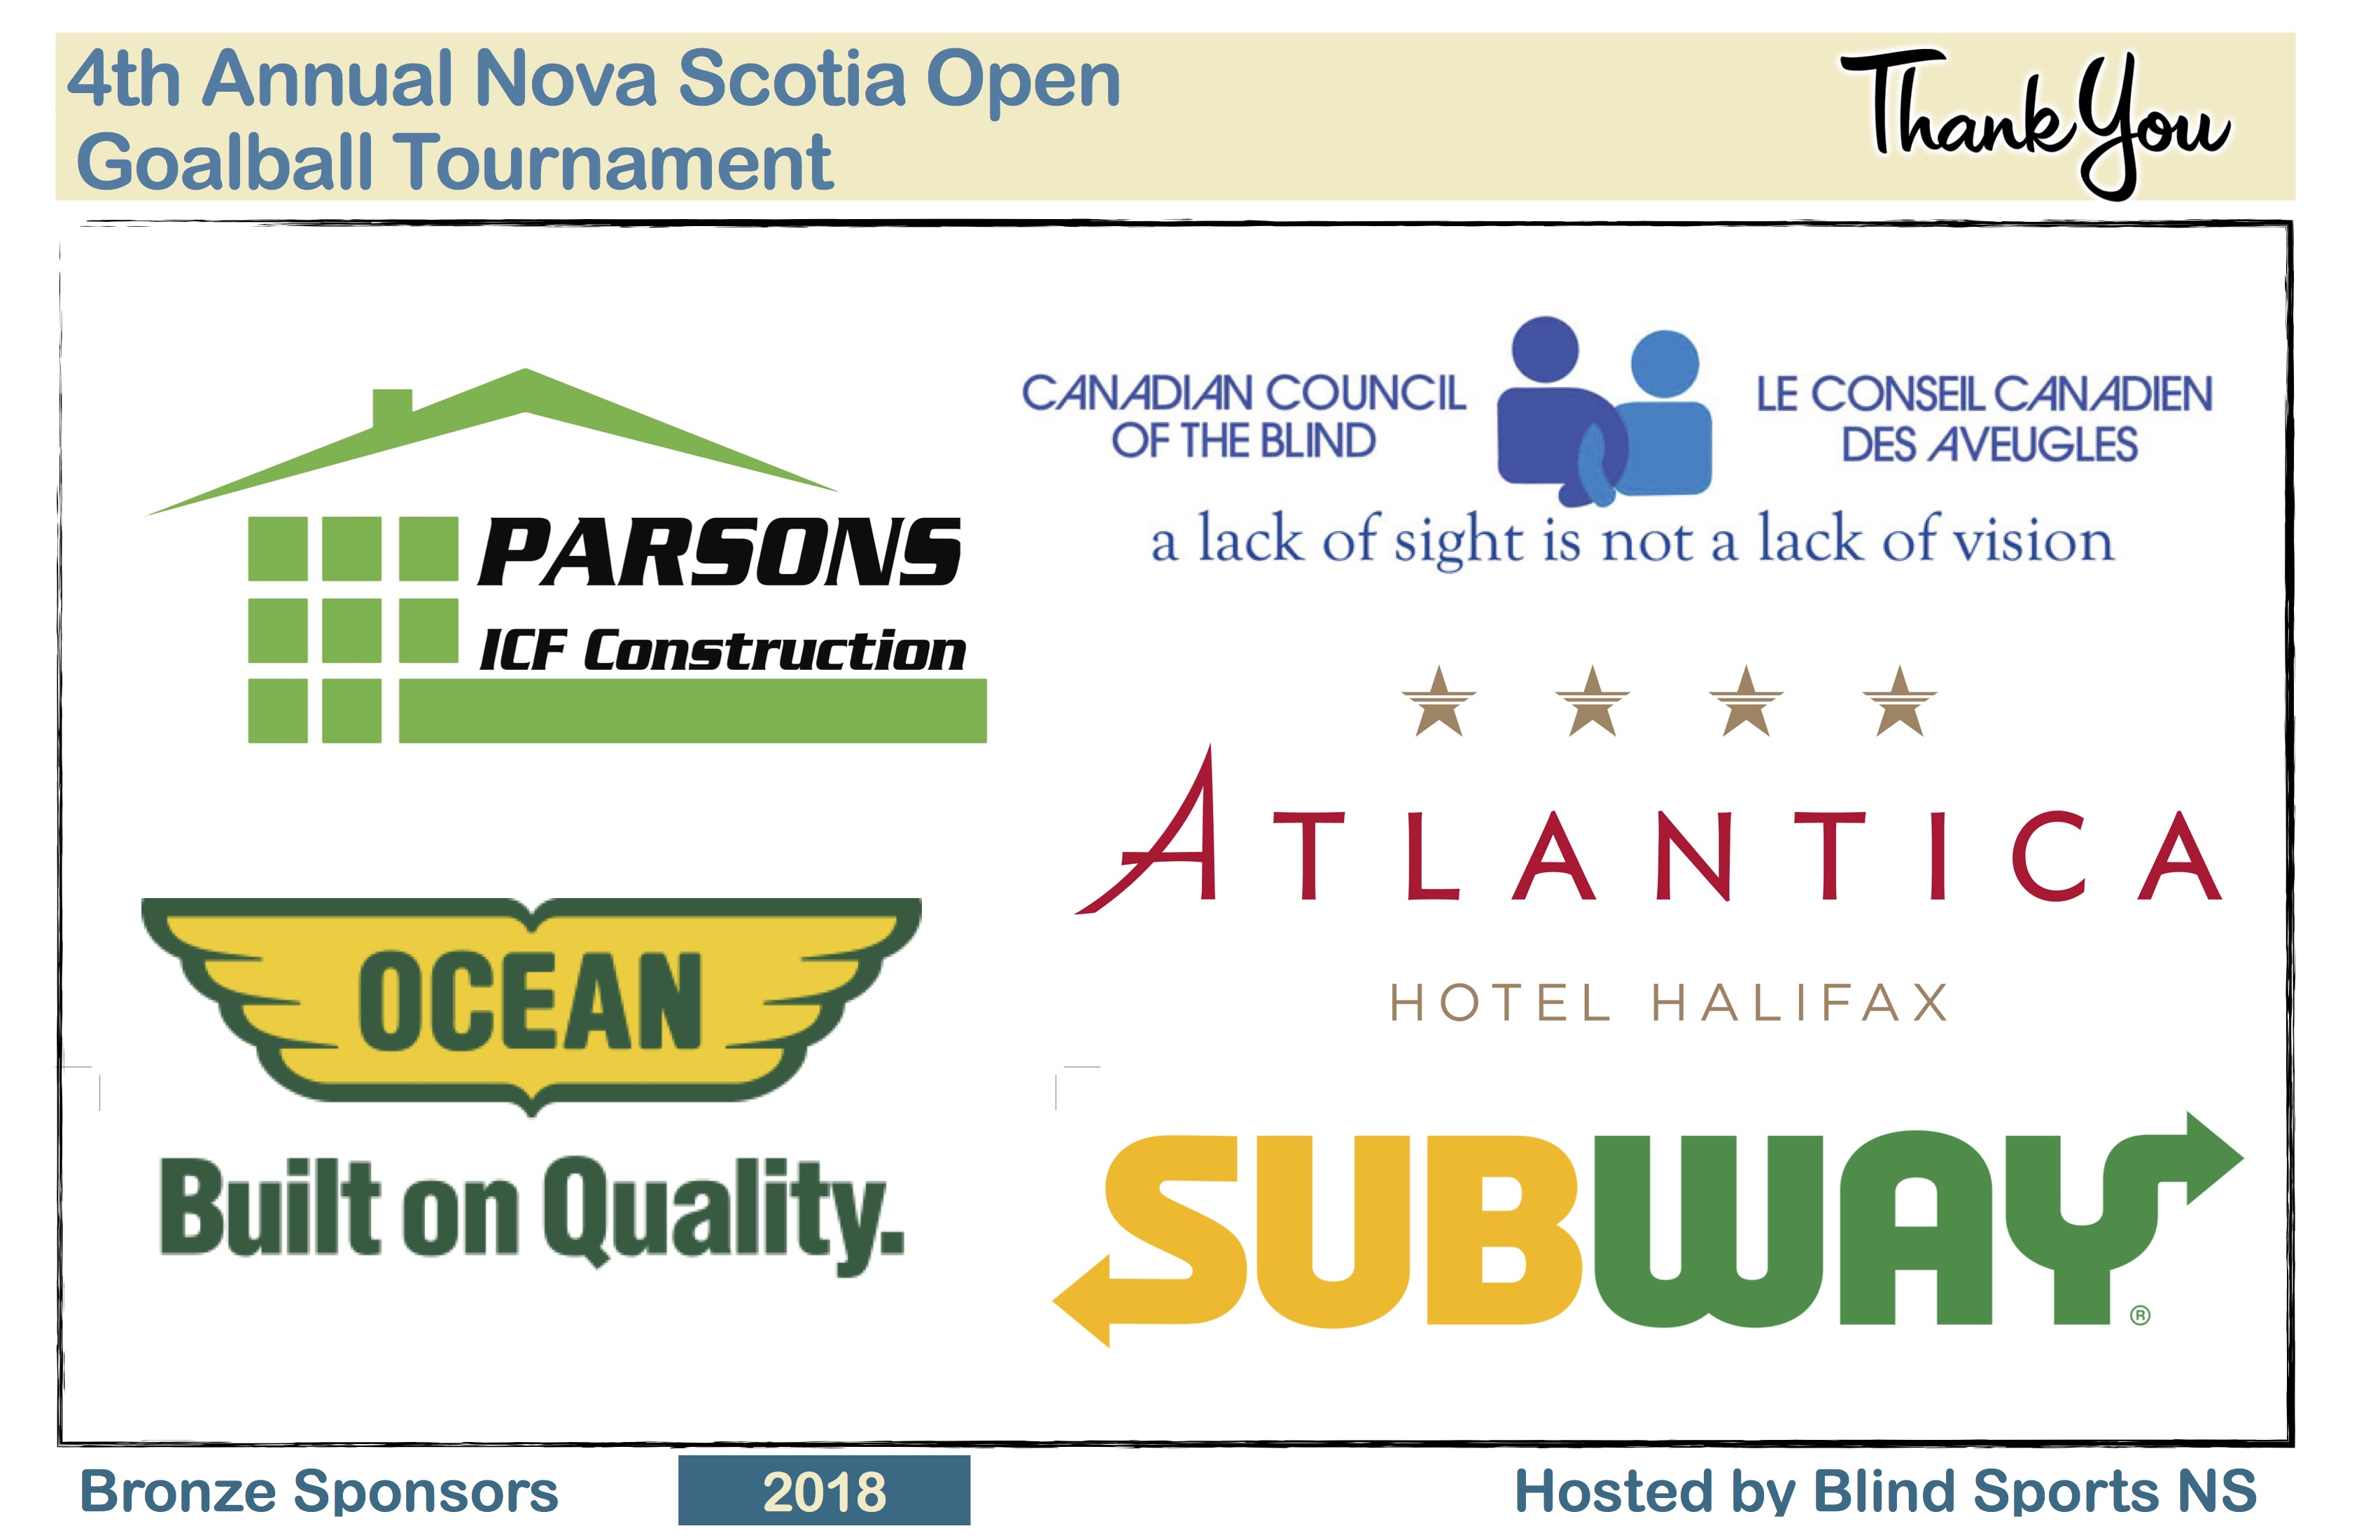 Bronze Sponsors: Parsons ICF Construction, Ocean - Built on Quality, Atlantica Hotel Halifax, Canadian Council of the Blind, and Subway.